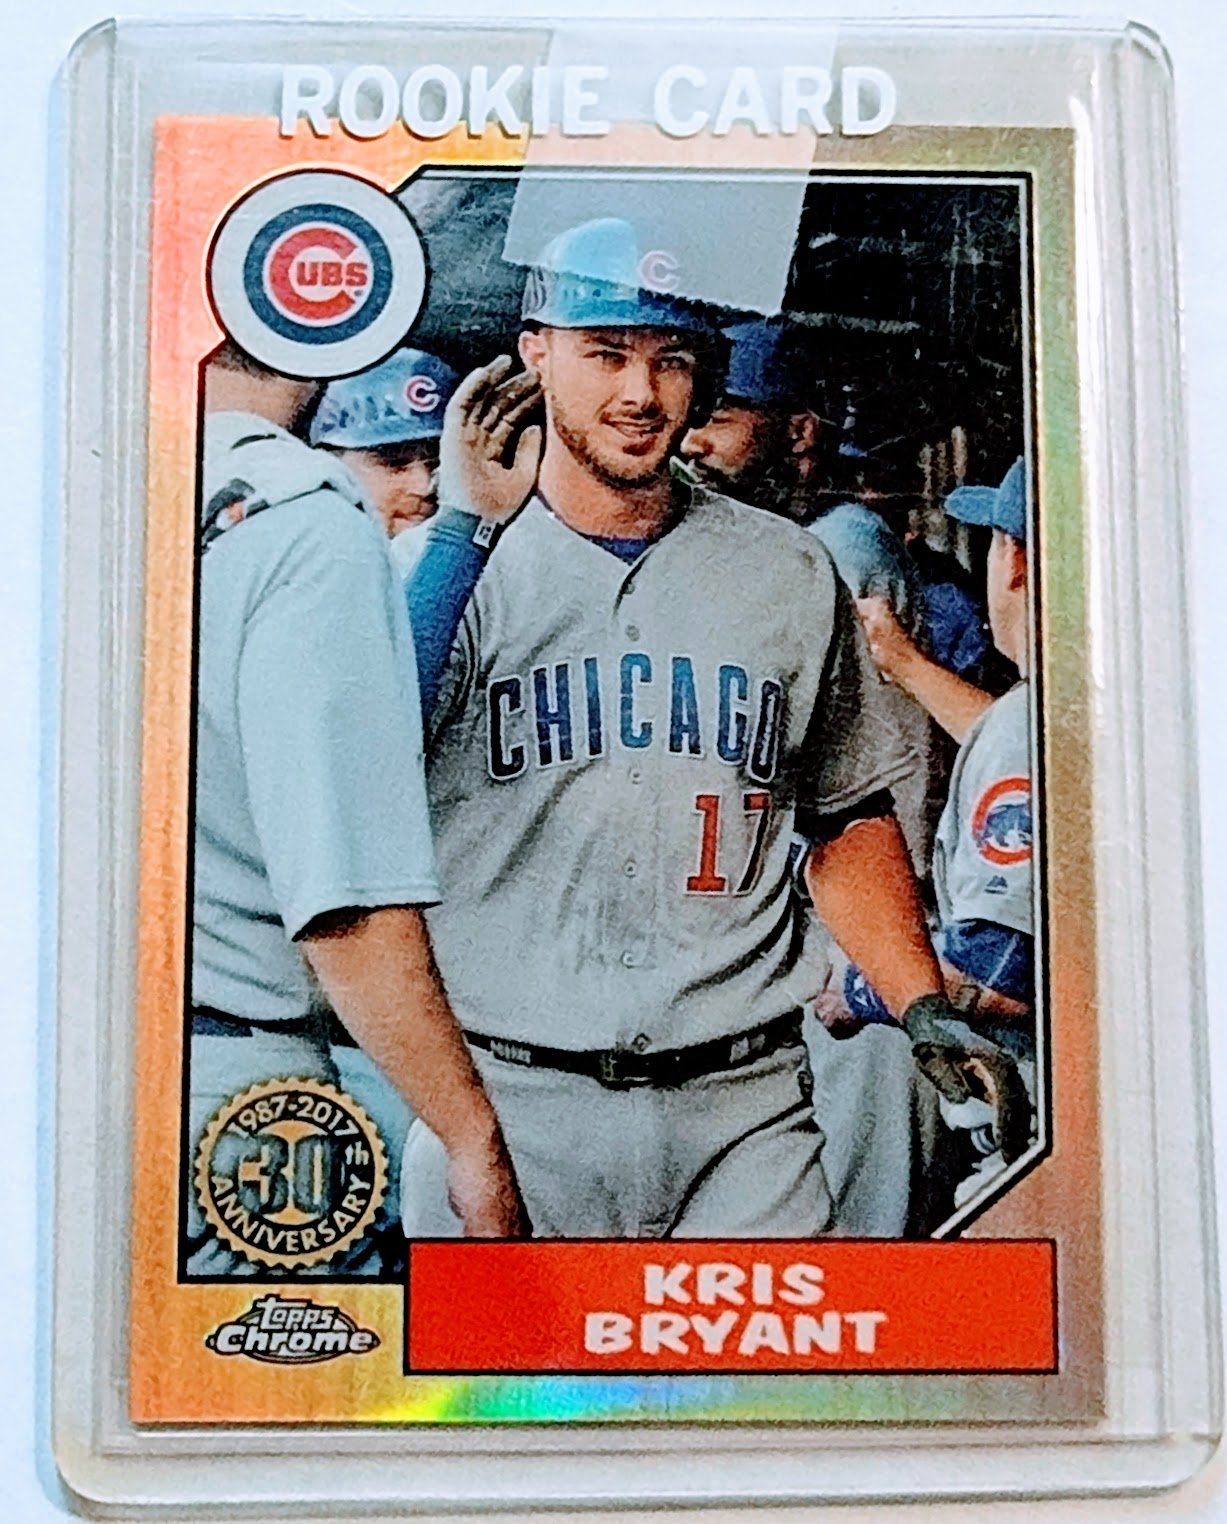 2017 Topps Chrome Kris Bryant 1987 30th Anniversary Refractor Baseball Card TPTV simple Xclusive Collectibles   